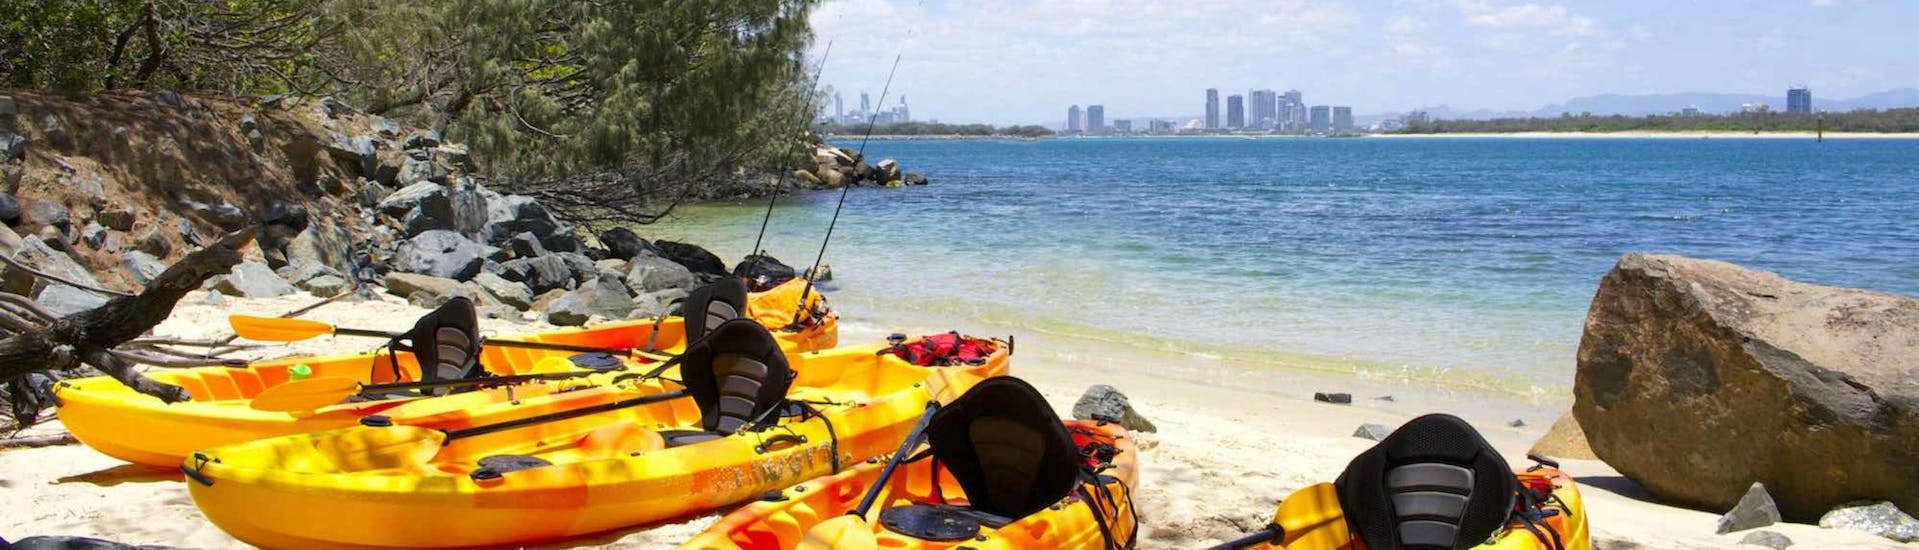 Four kayaks are lined up next to each other on the beach, ready for the guests taking part in the activity Sea Kayaking in Gold Coast - 'Chill-Out Tour' with Seaway Kayaking Tours.